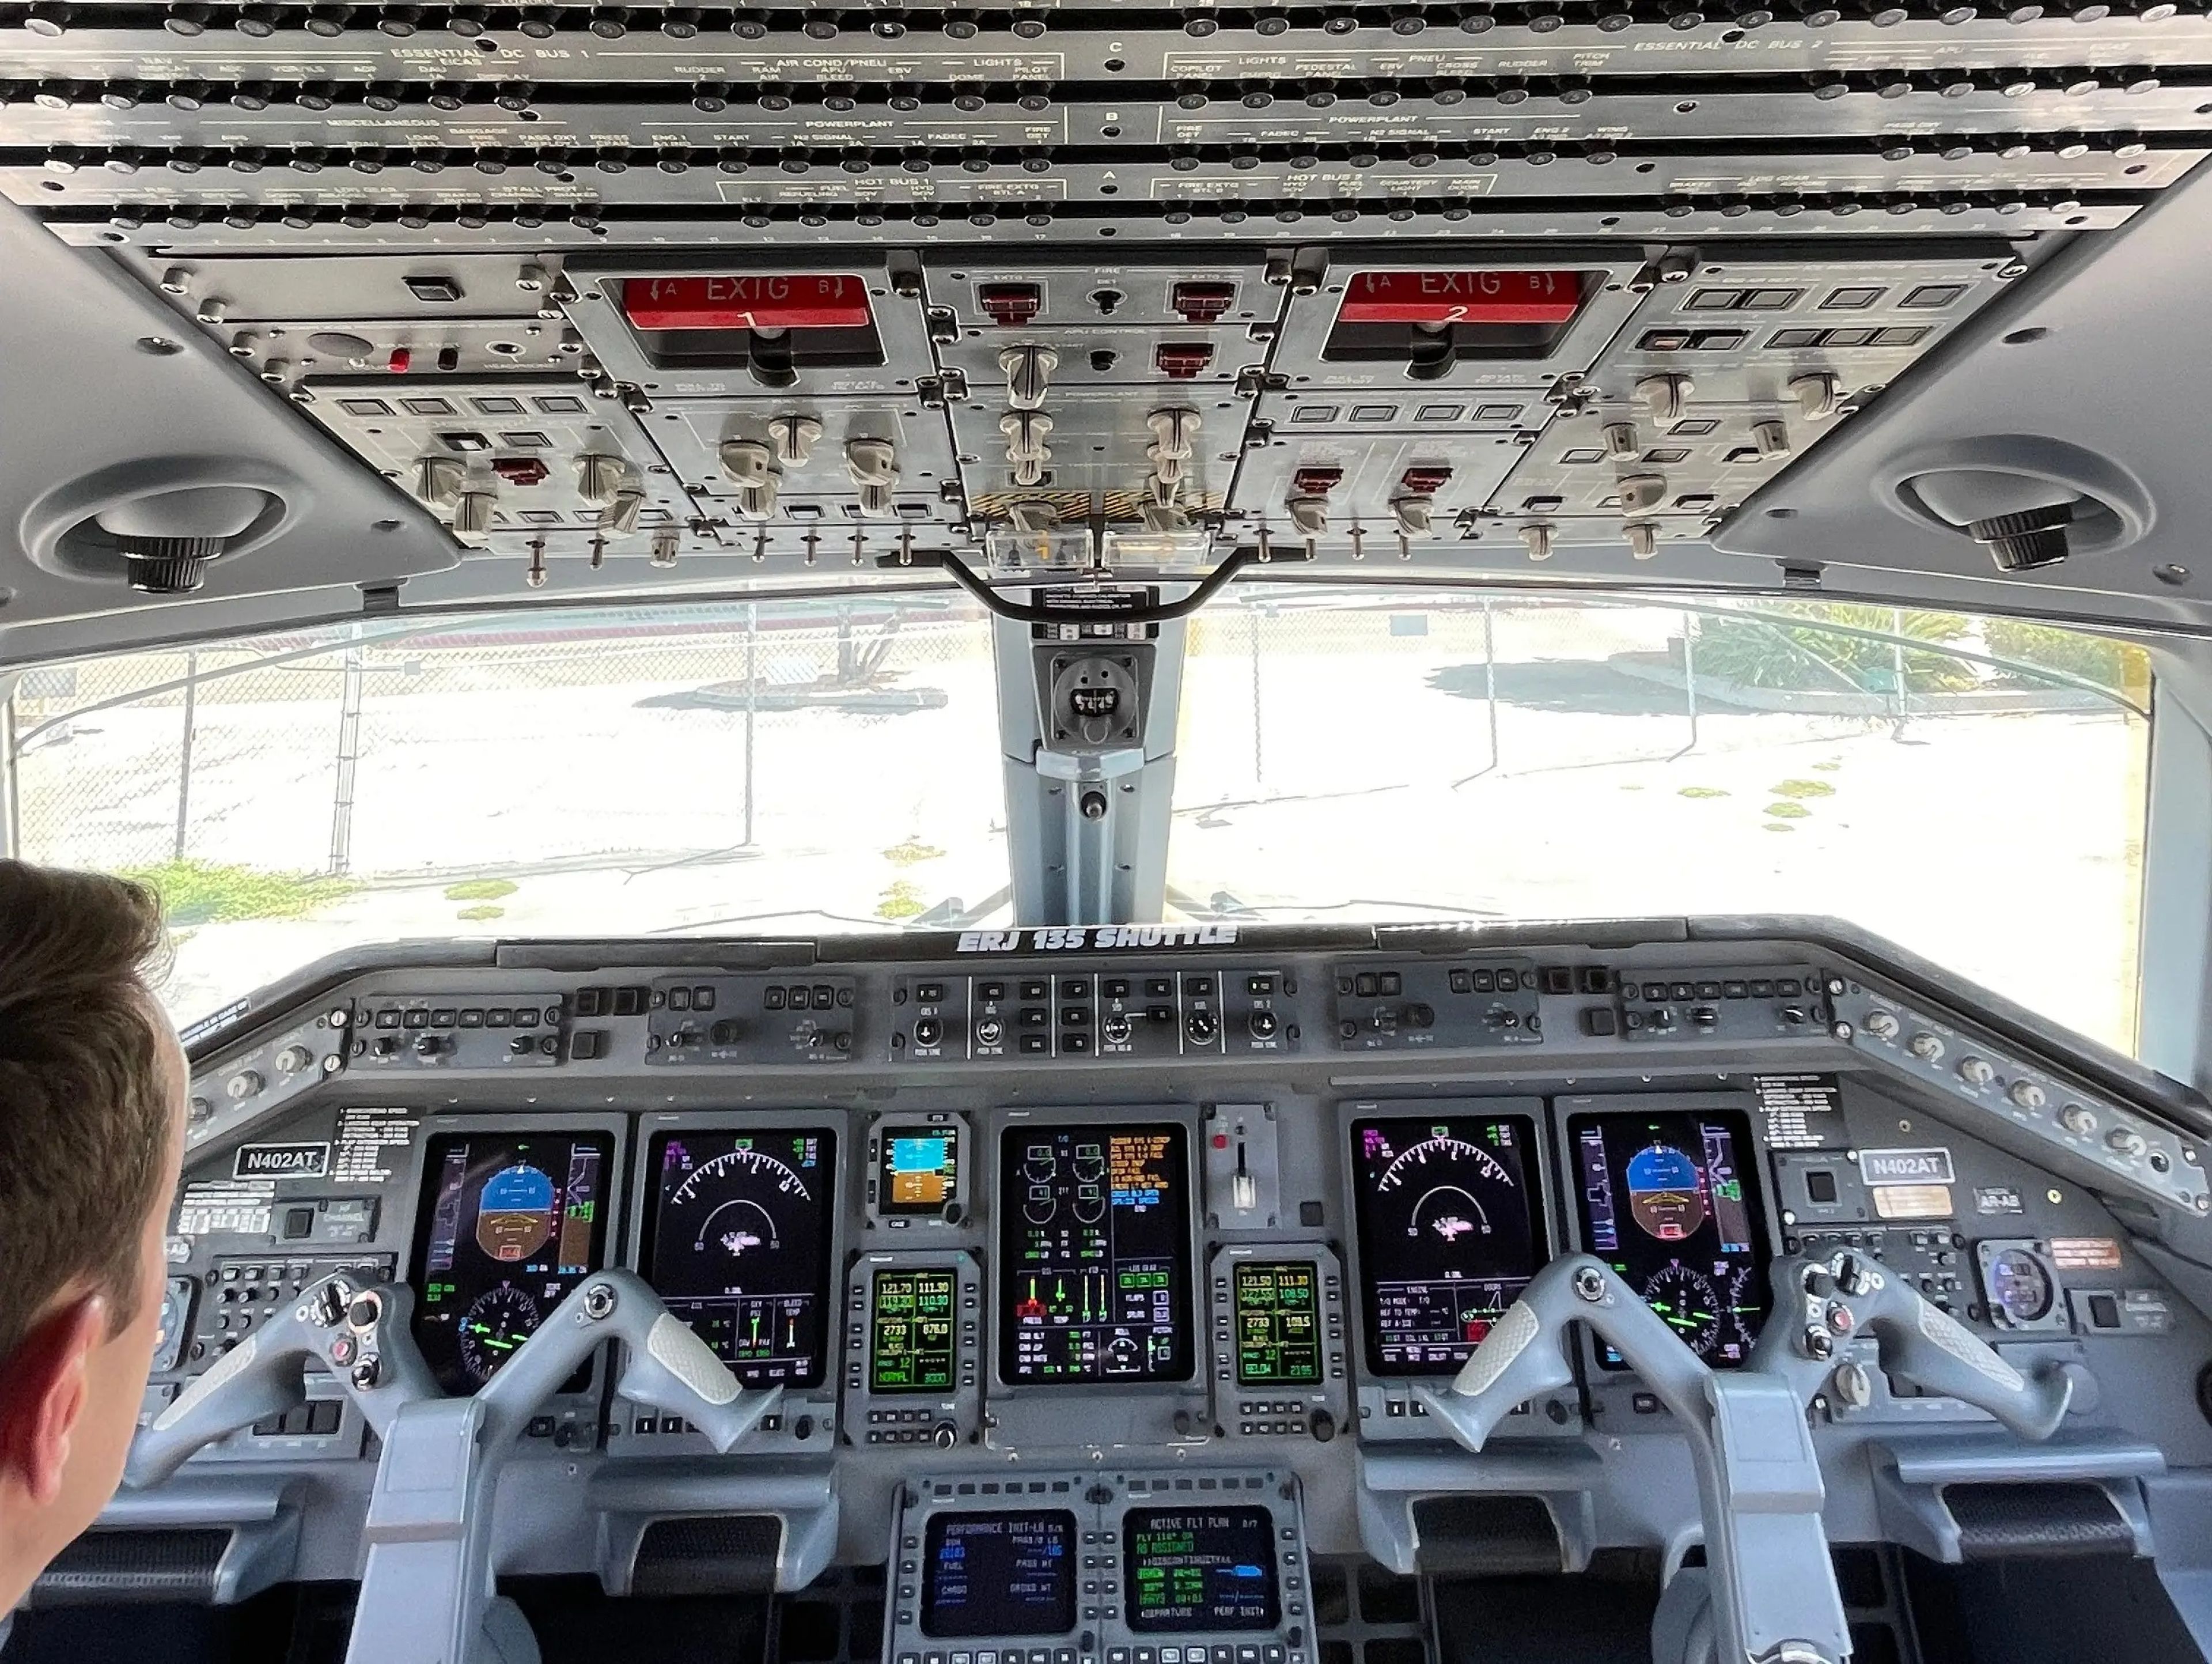 View of the cockpit from the doorway.